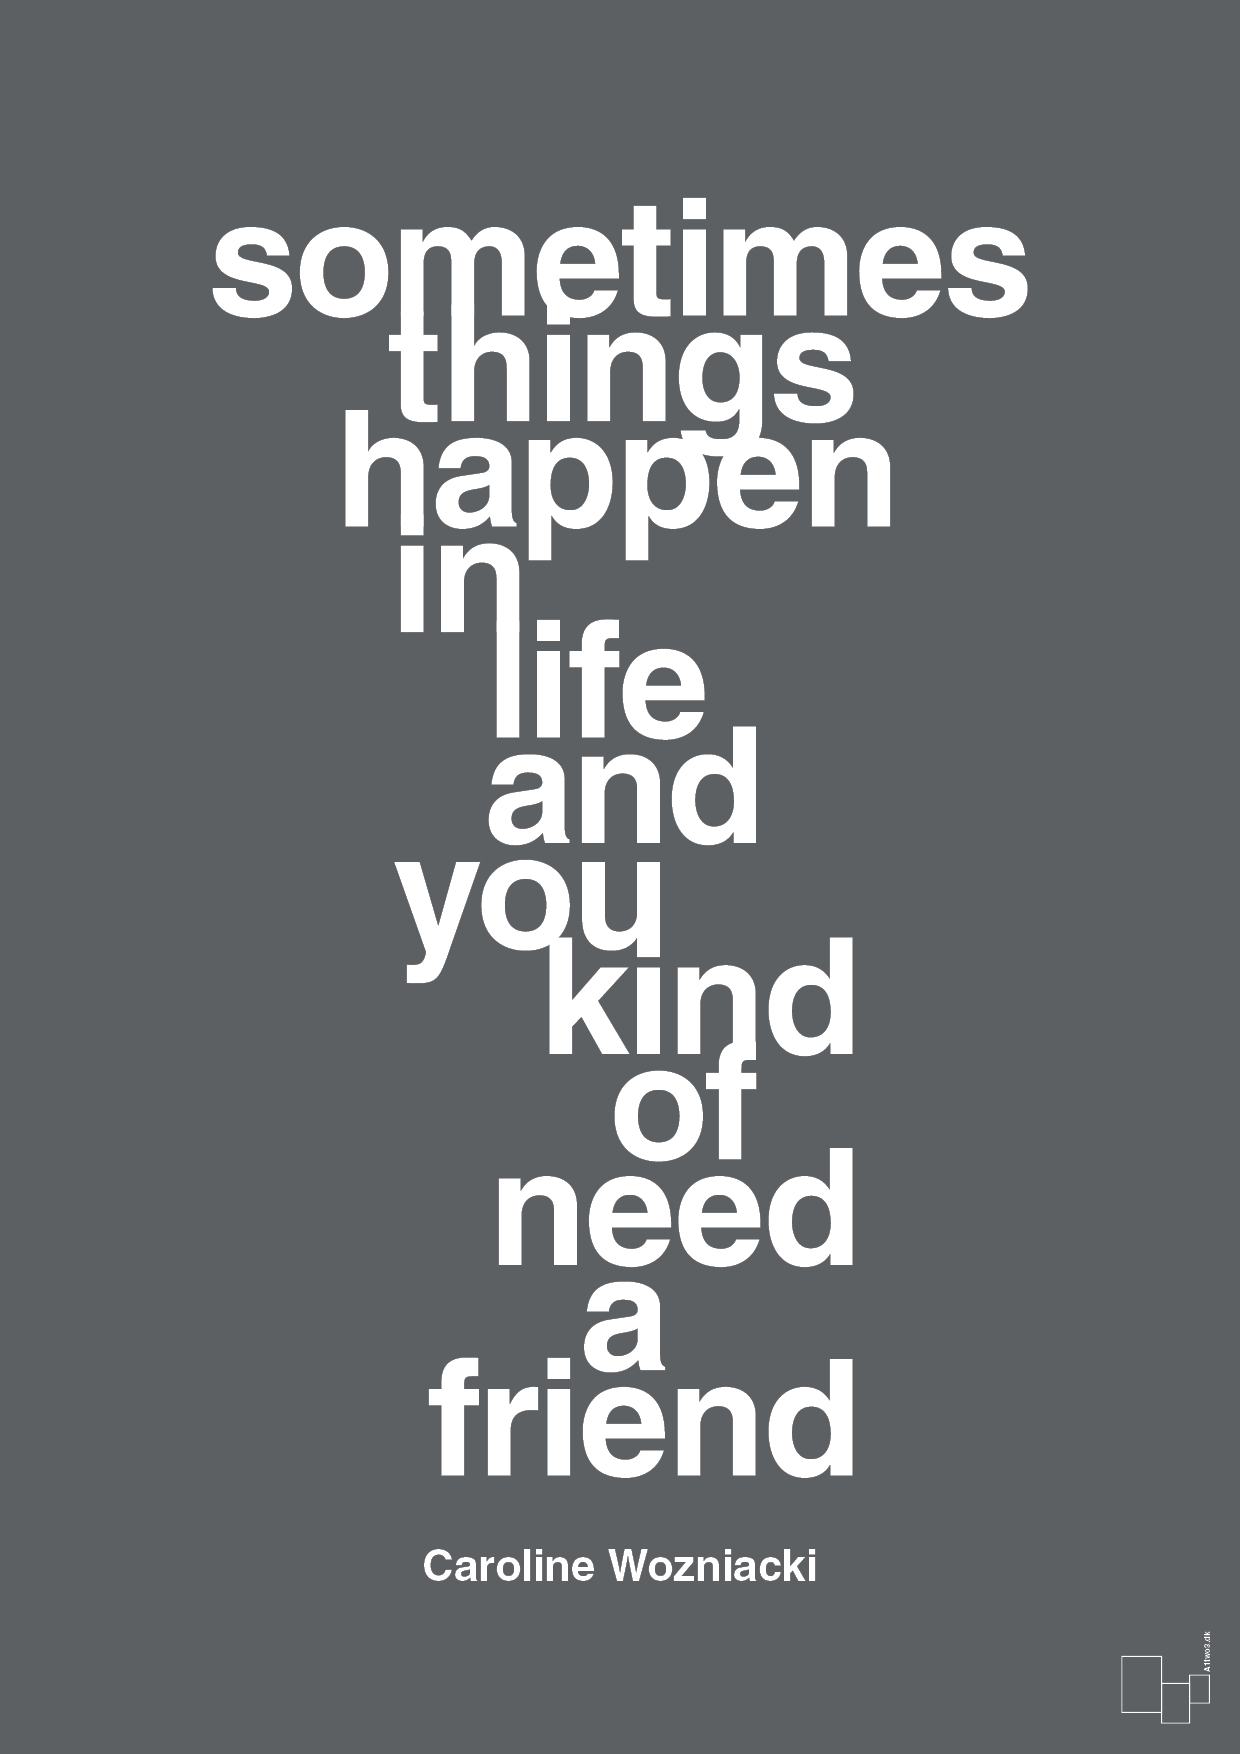 sometimes things happen in life and you kind of need a friend - Plakat med Citater i Graphic Charcoal